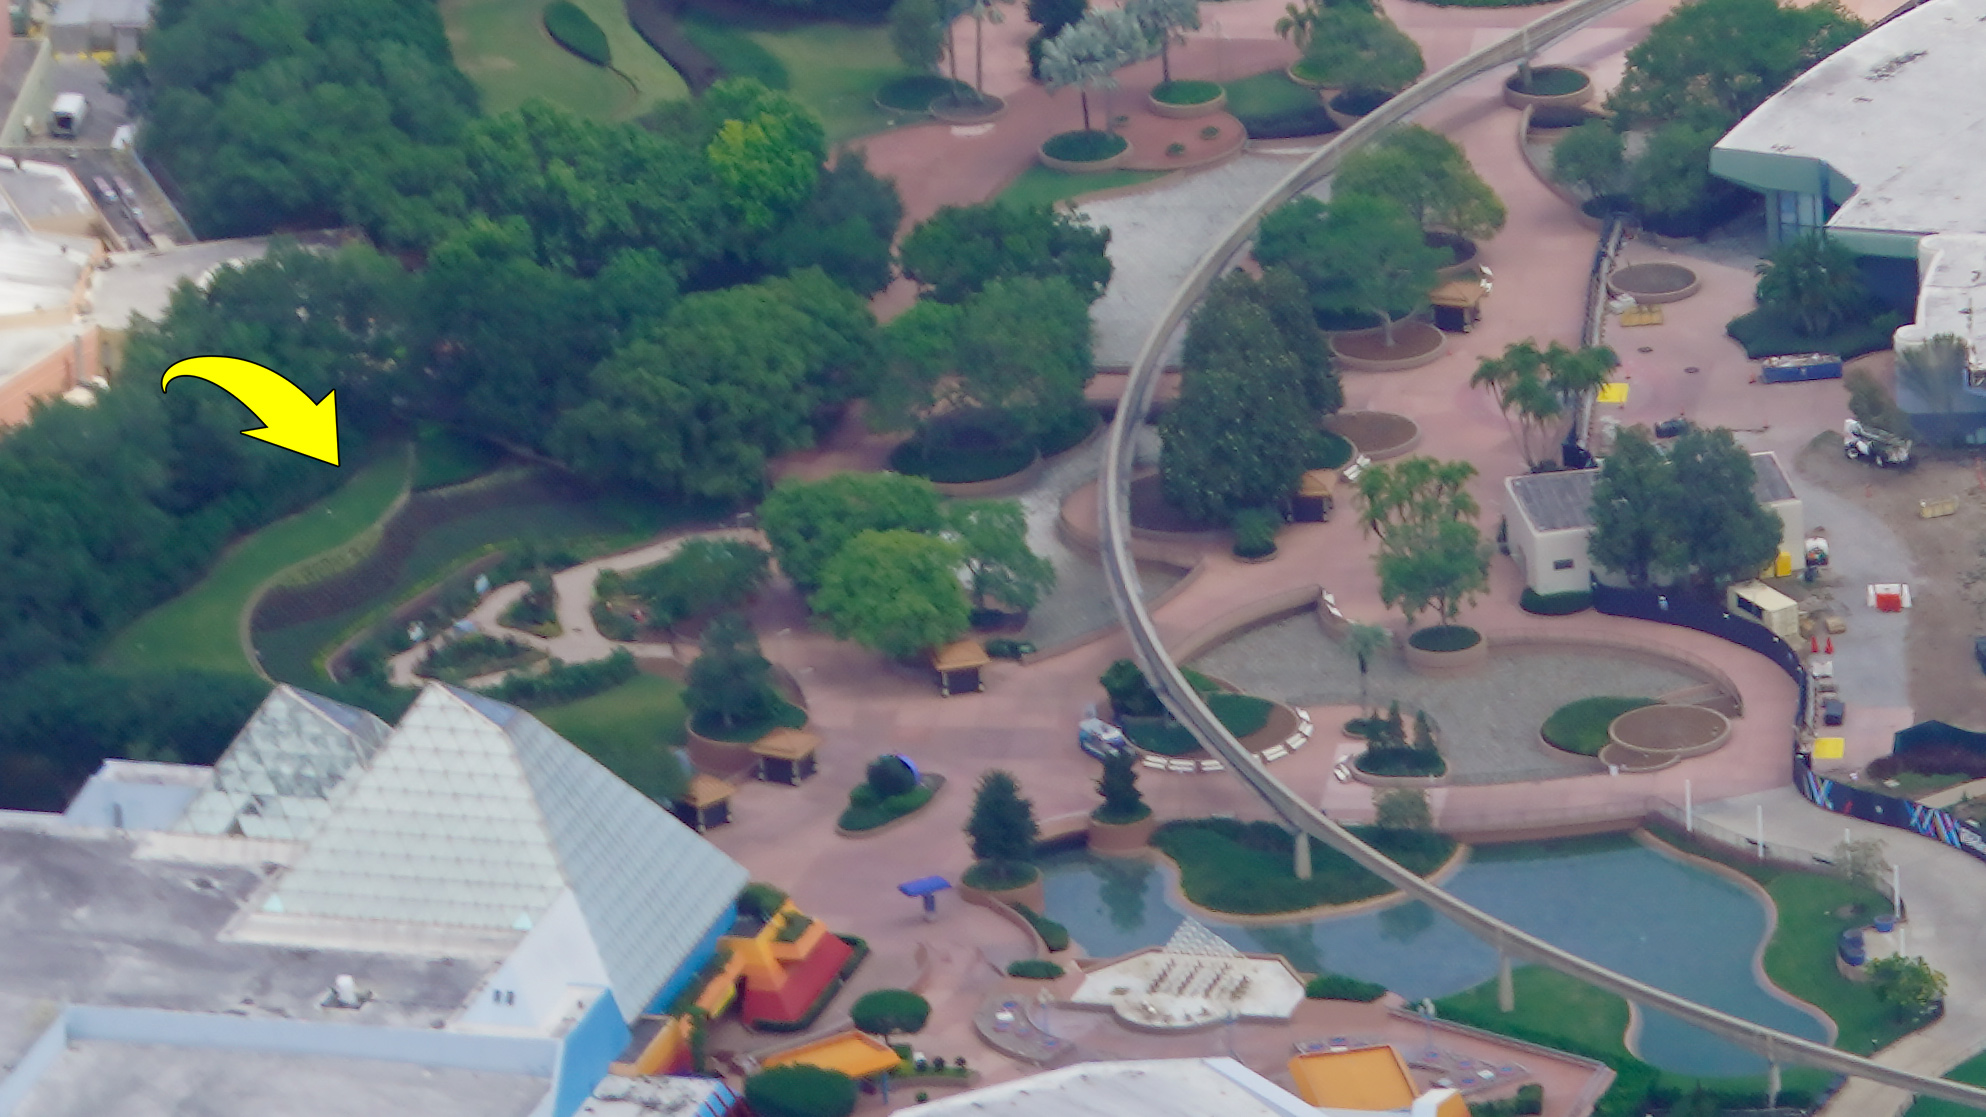 epcot flower and garden topiaries removed bioreconstruct 1